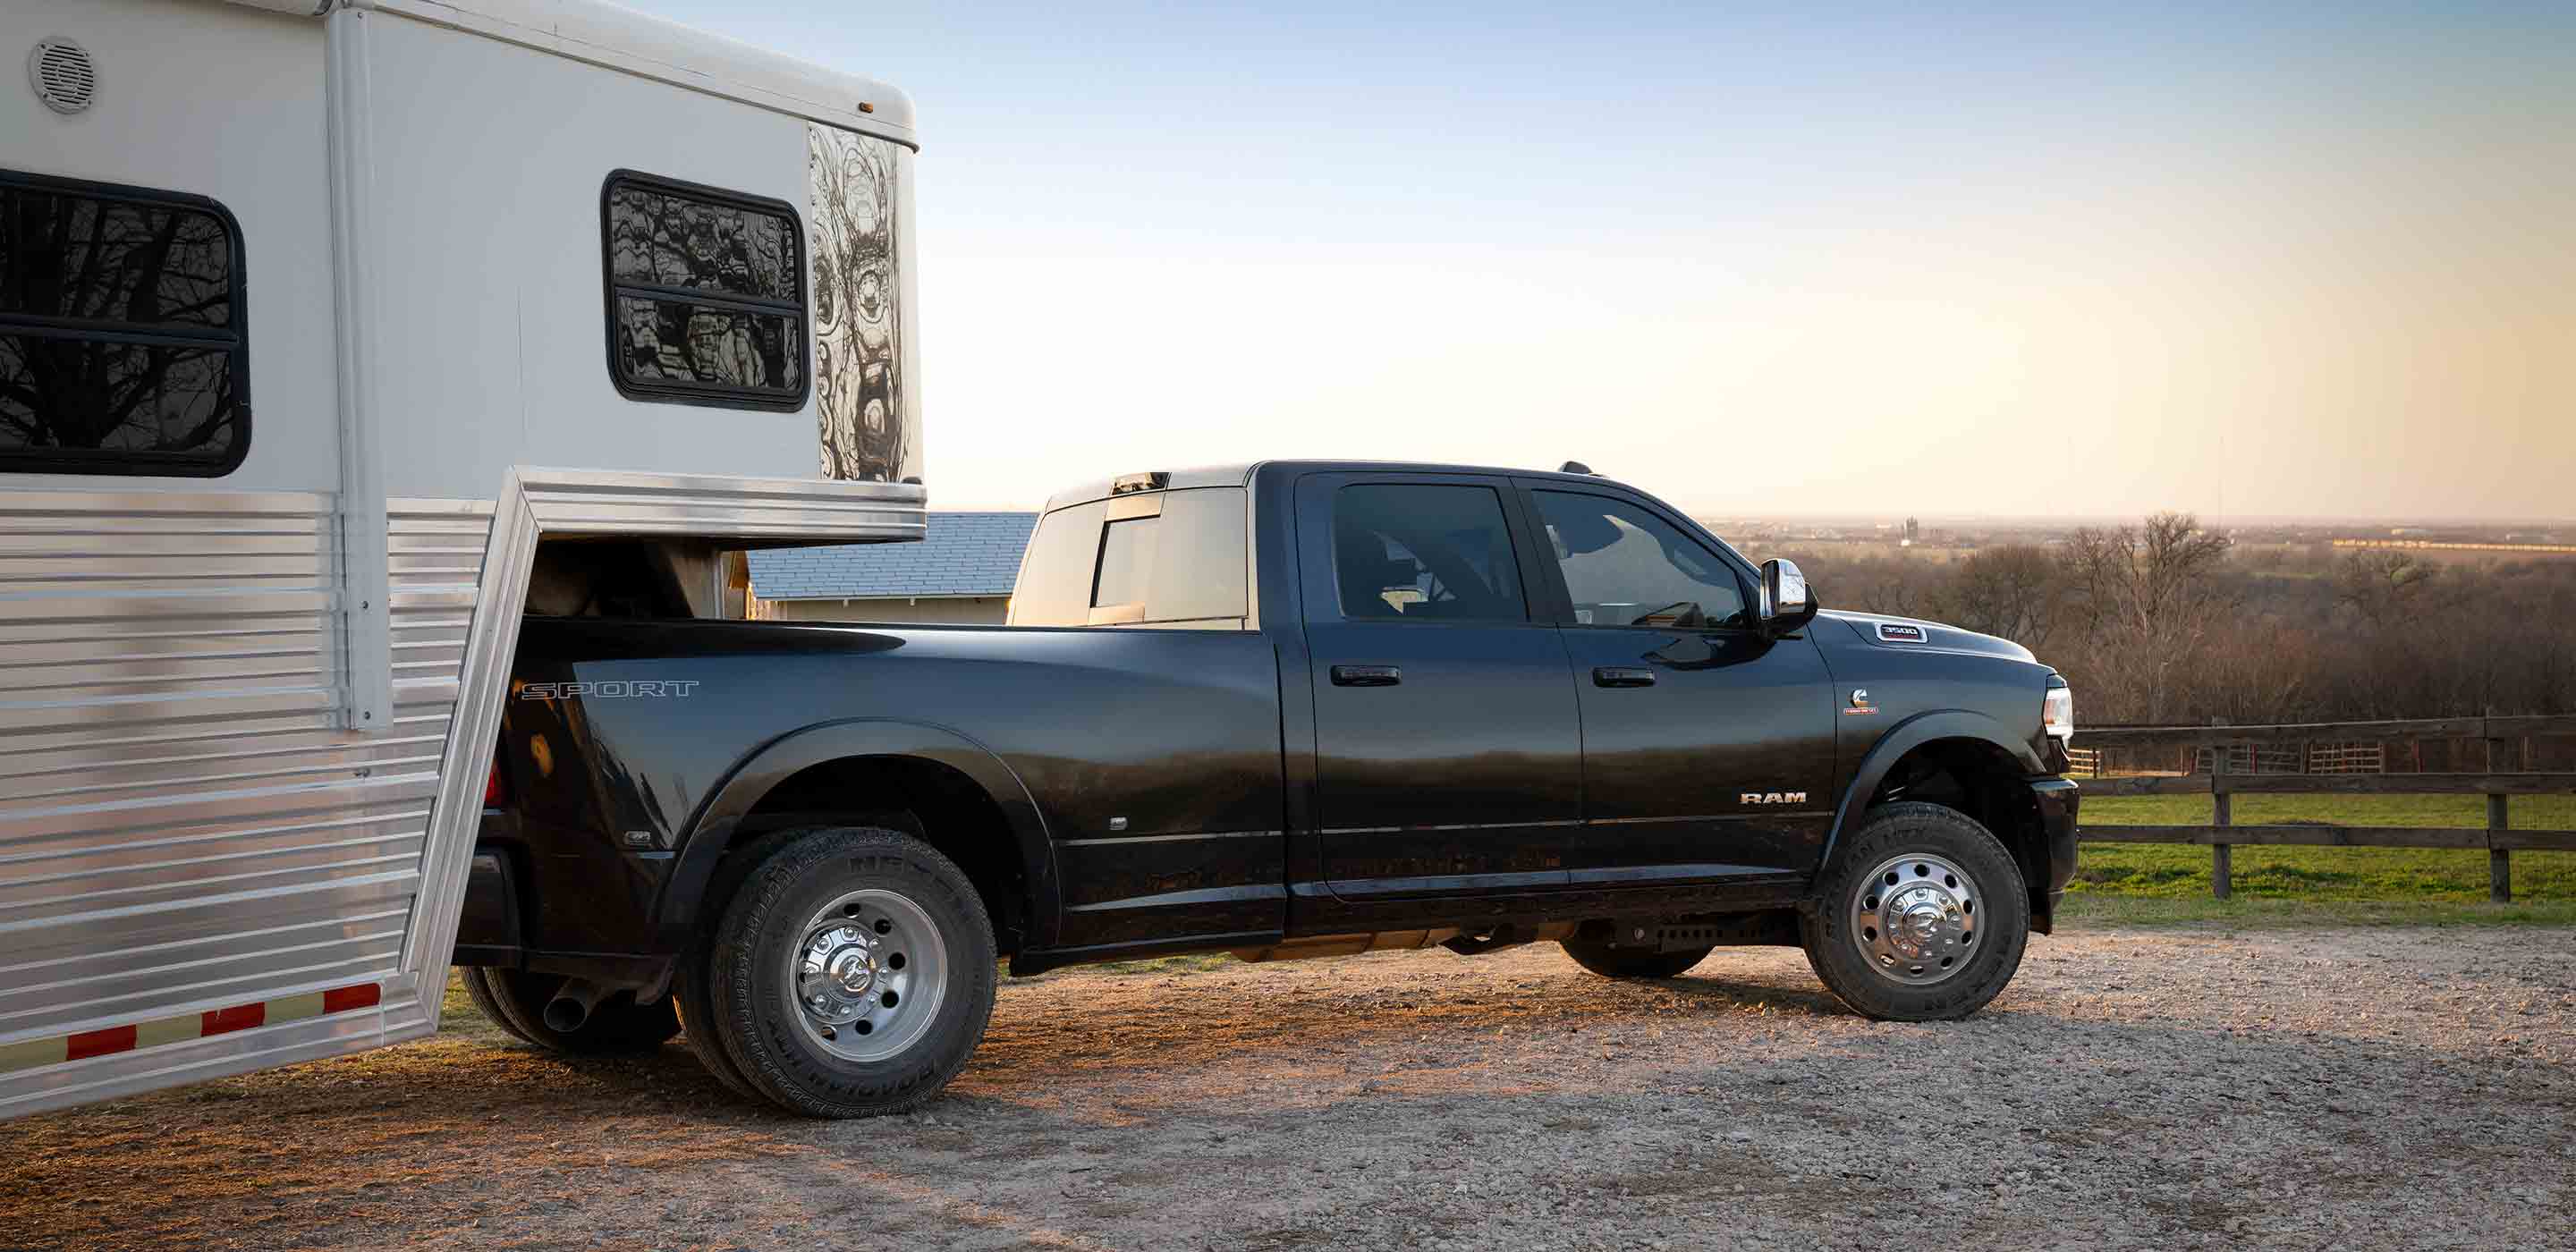 Display The 2022 Ram 3500 parked on a gravel drive with a horse trailer attached to it.